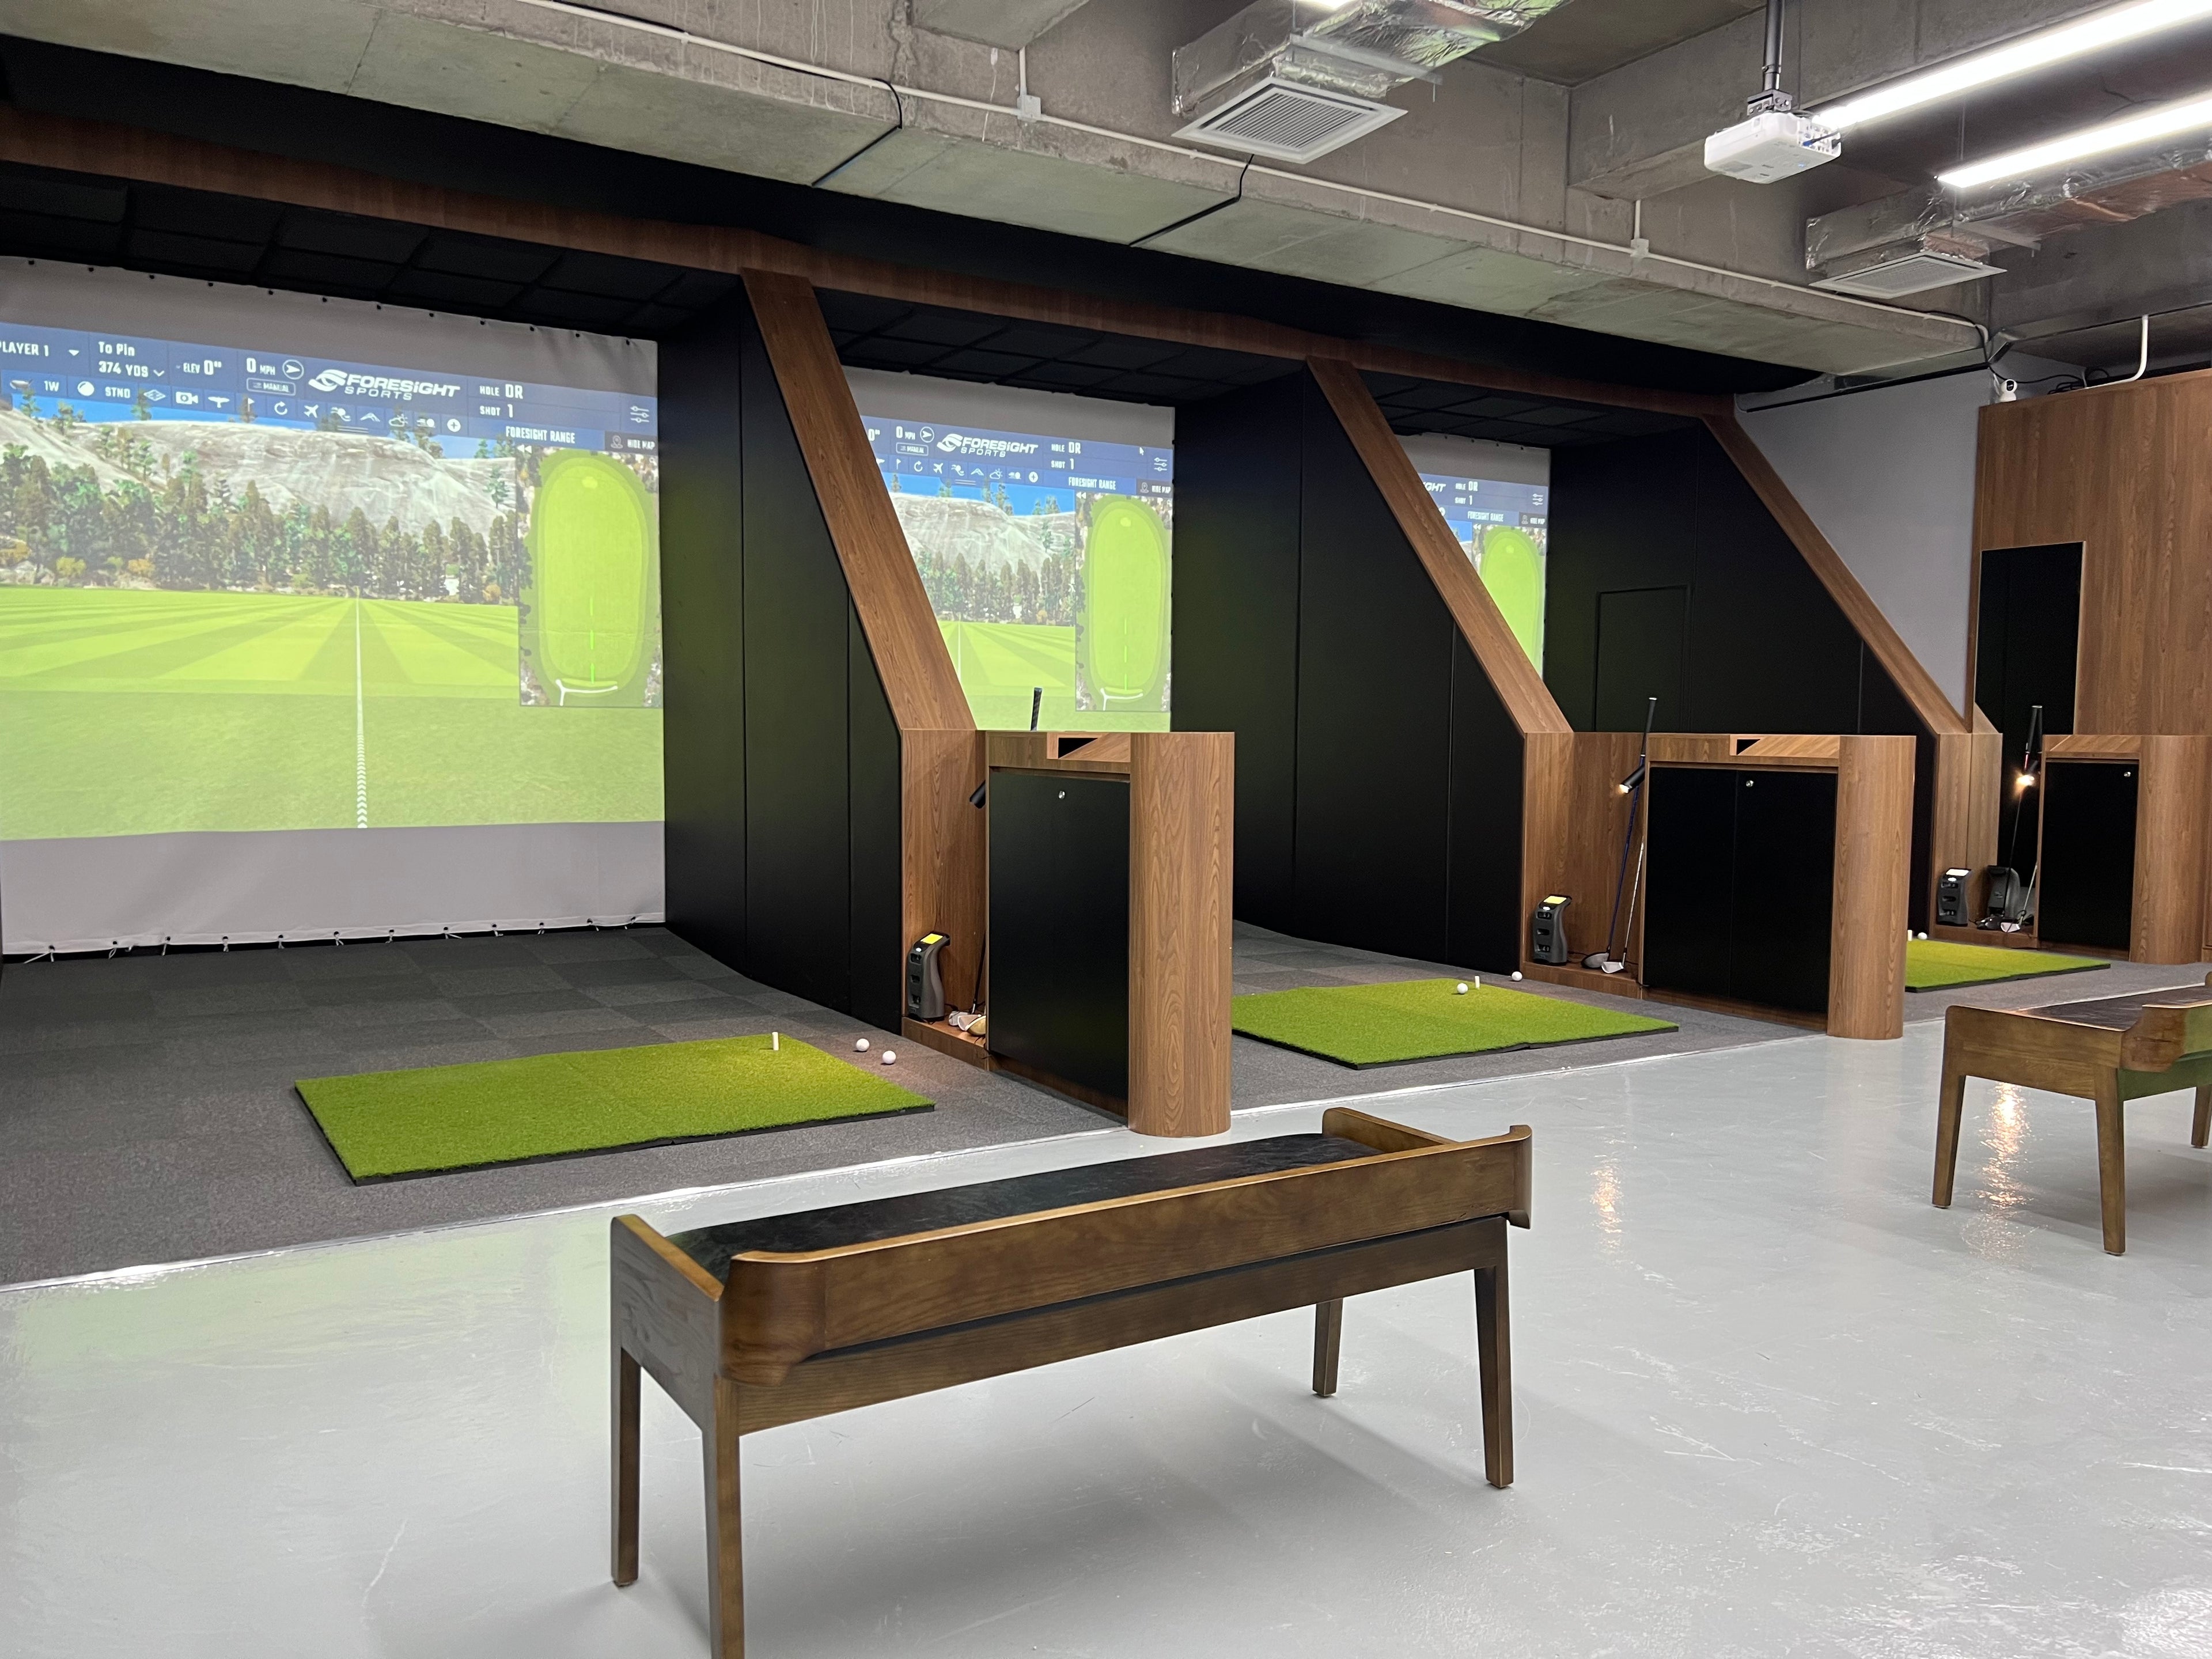 Image of three indoor golf simulator bays. Each simulator bay features a high-quality screen, a golf mat, and a high speed camera.